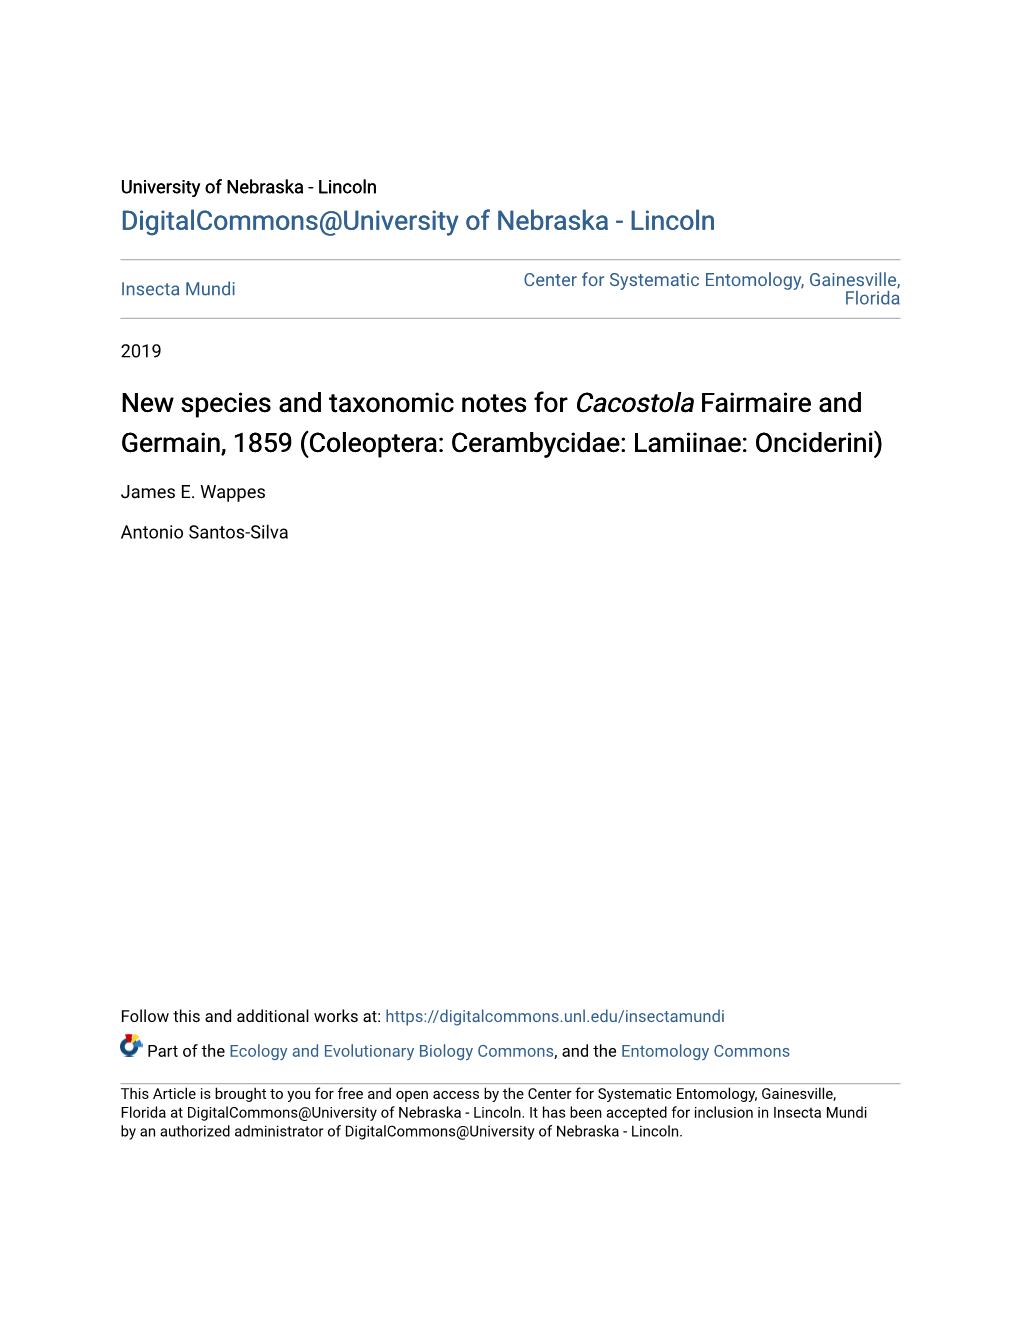 New Species and Taxonomic Notes for &lt;I&gt;Cacostola&lt;/I&gt; Fairmaire And